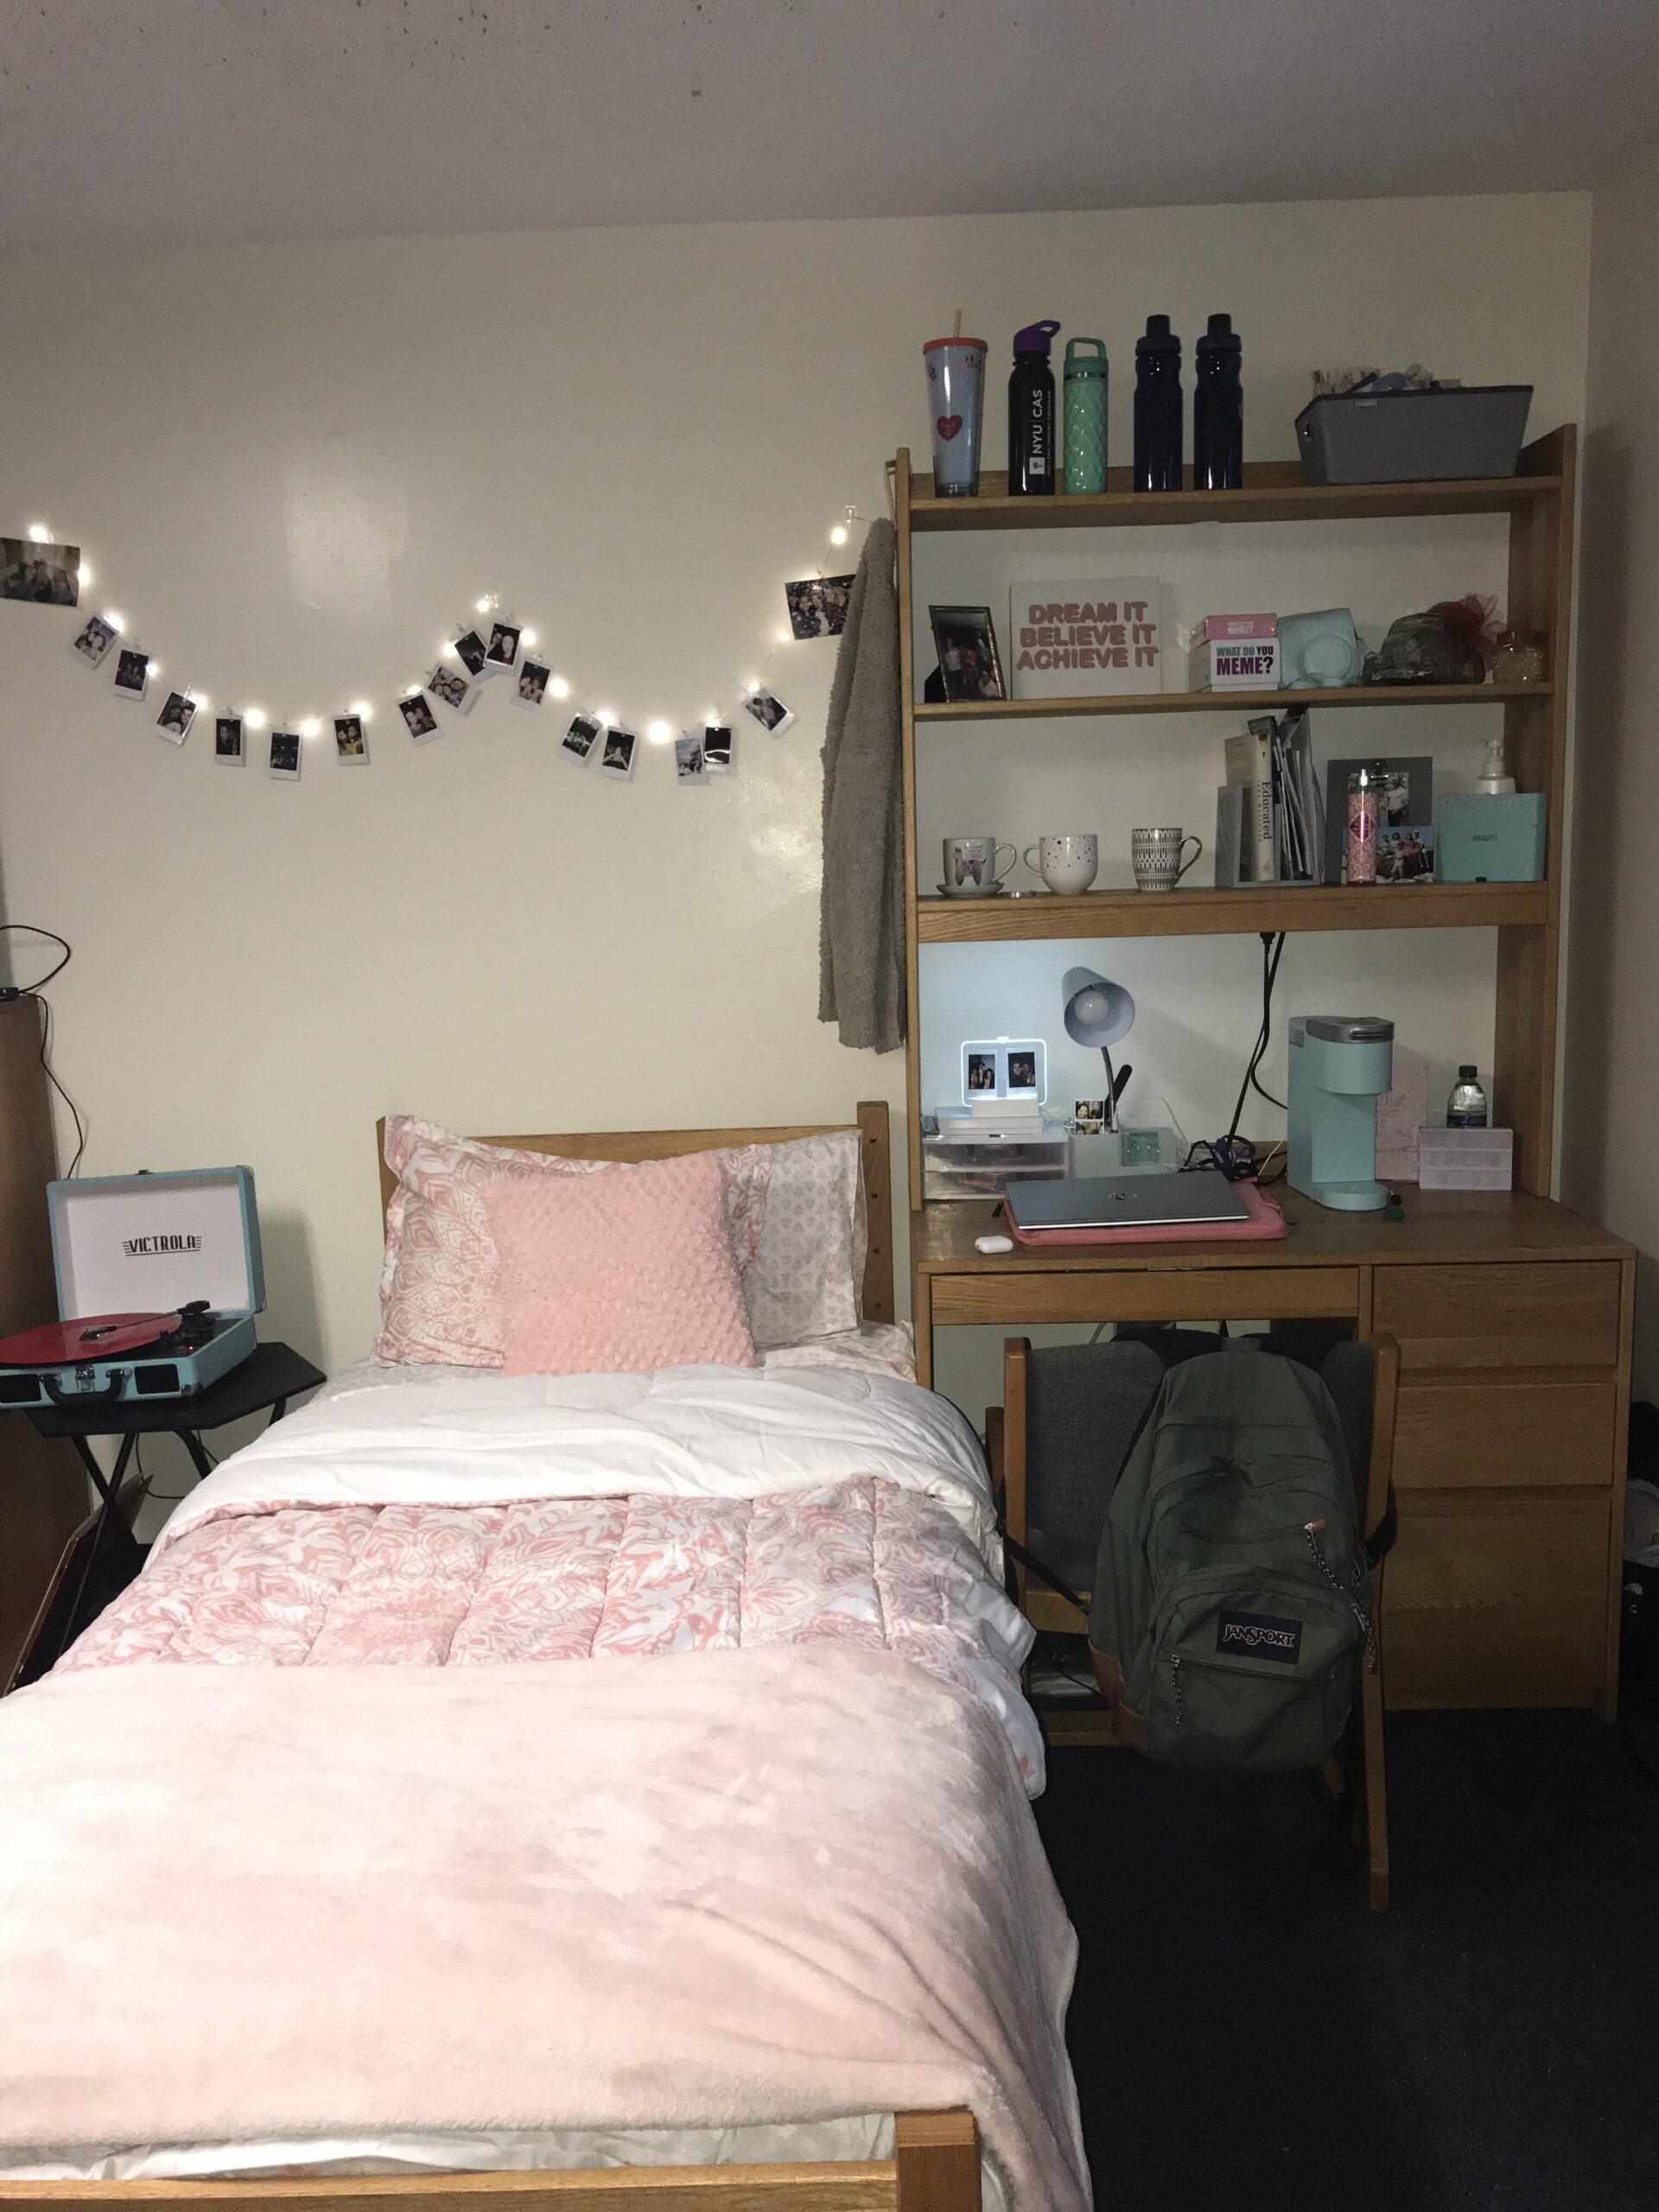 Morgan's first-year residence set up featuring a bed, a well-stocked bookcase and desk, and fairy lights.